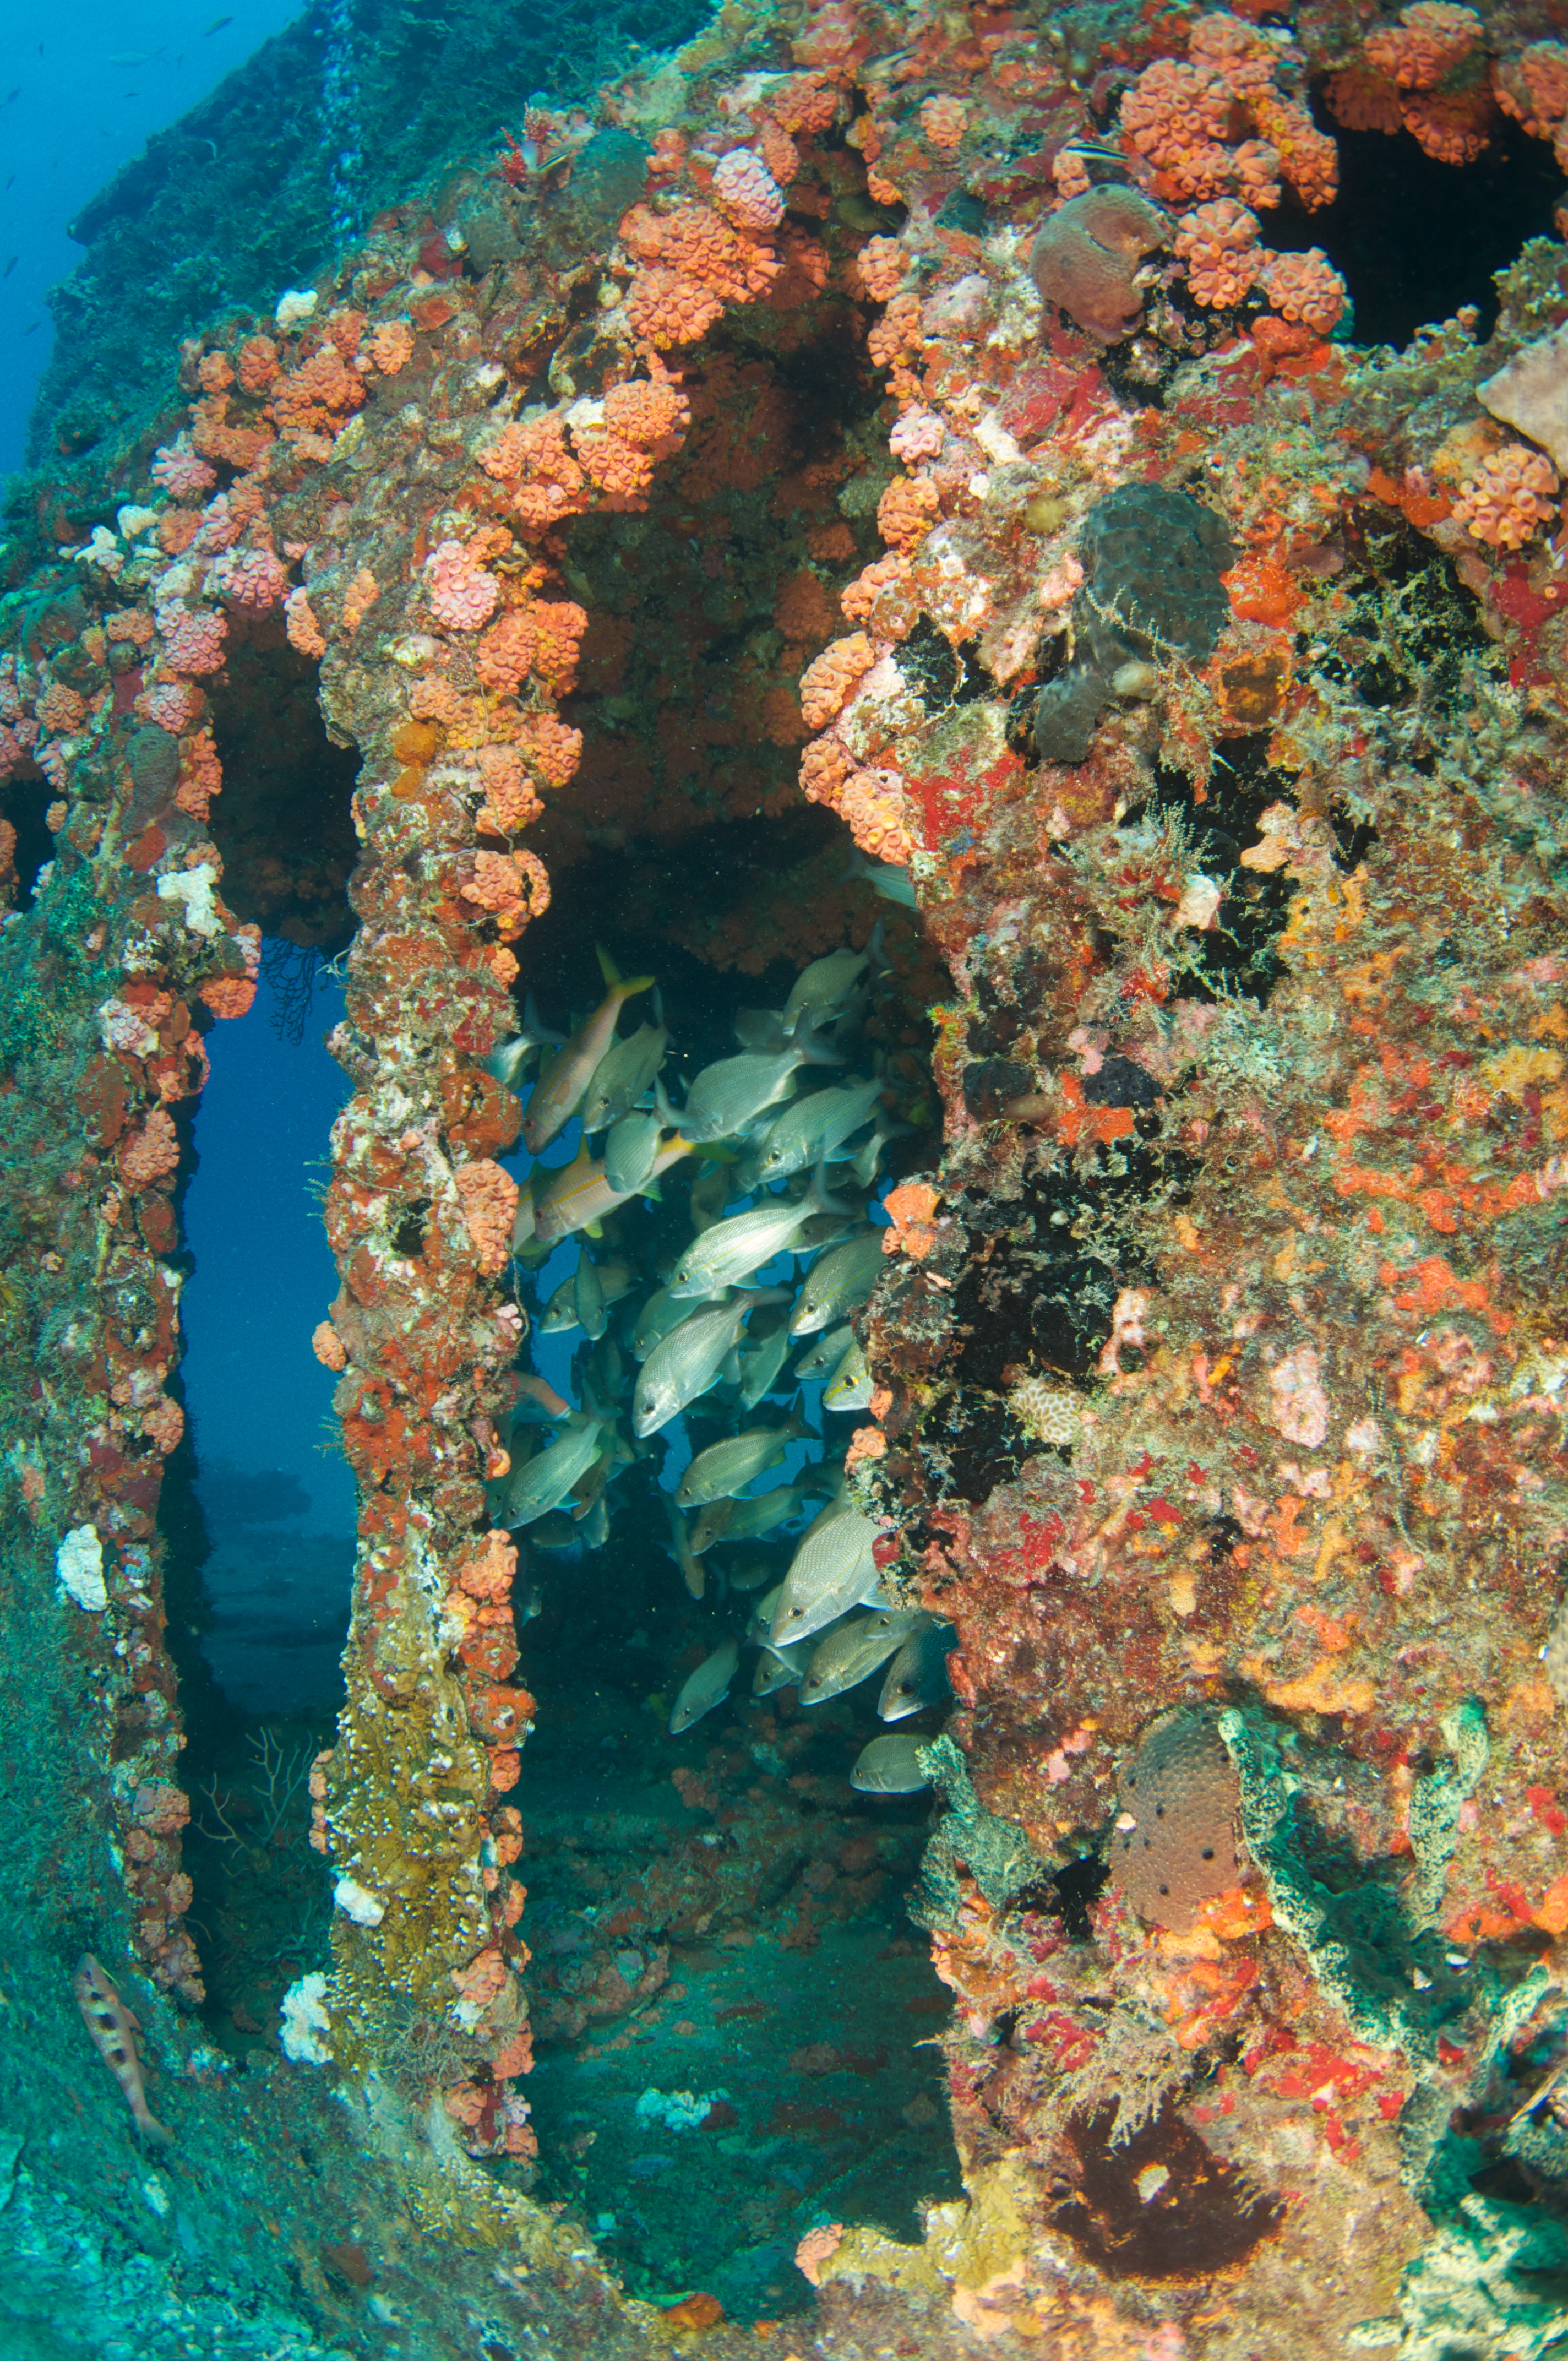 artificial reef encrusted in coral provides shelter for reef fish